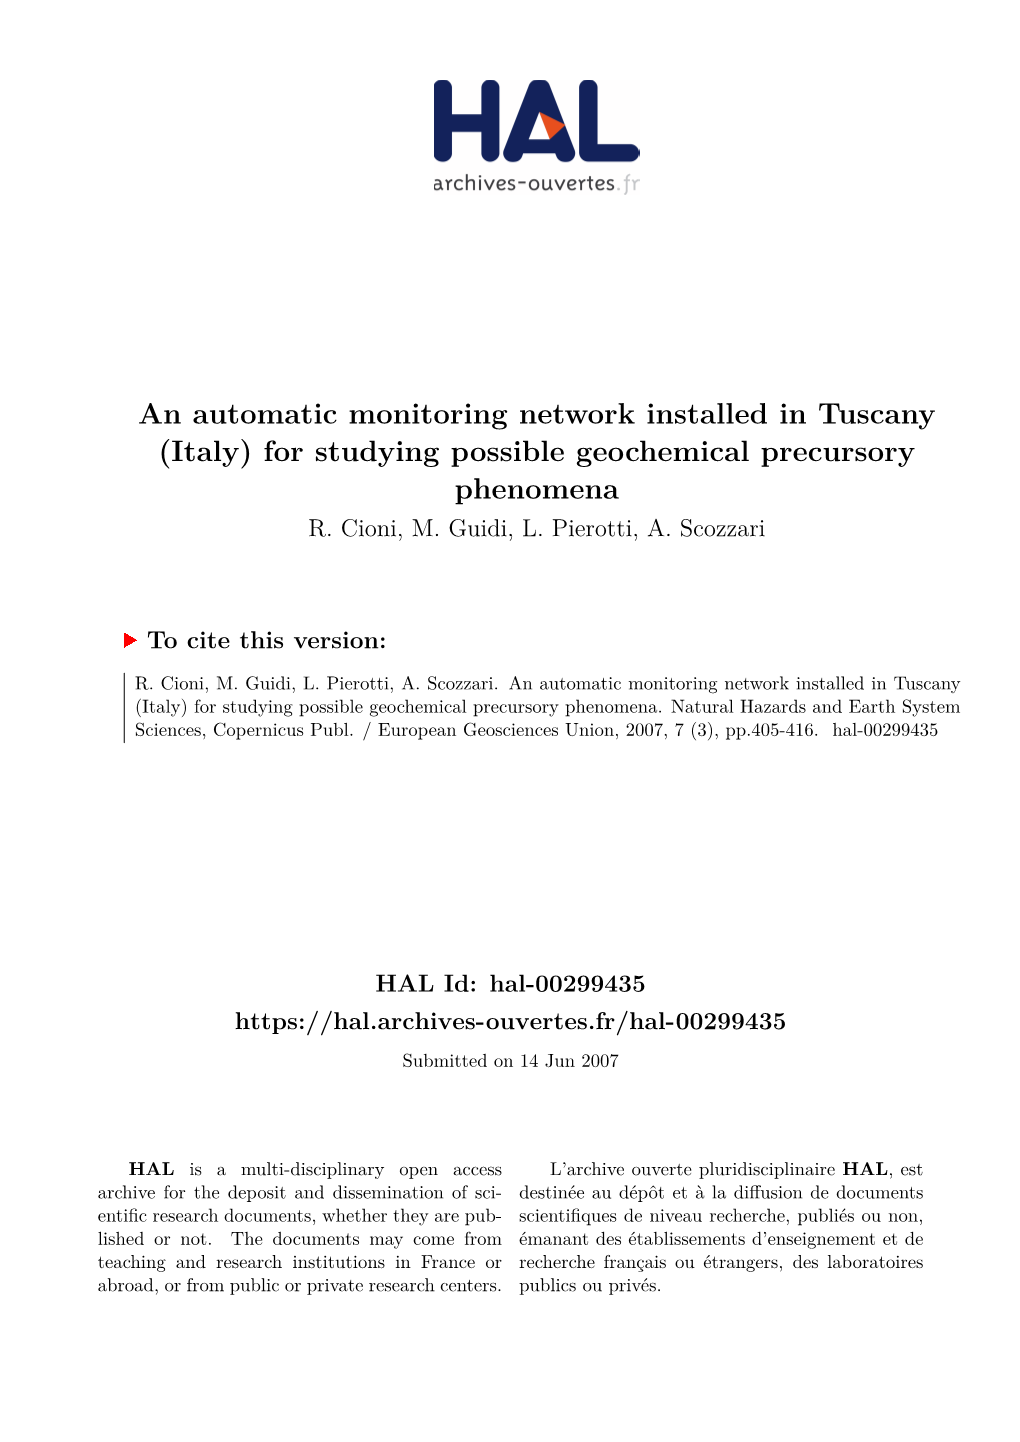 An Automatic Monitoring Network Installed in Tuscany (Italy) for Studying Possible Geochemical Precursory Phenomena R